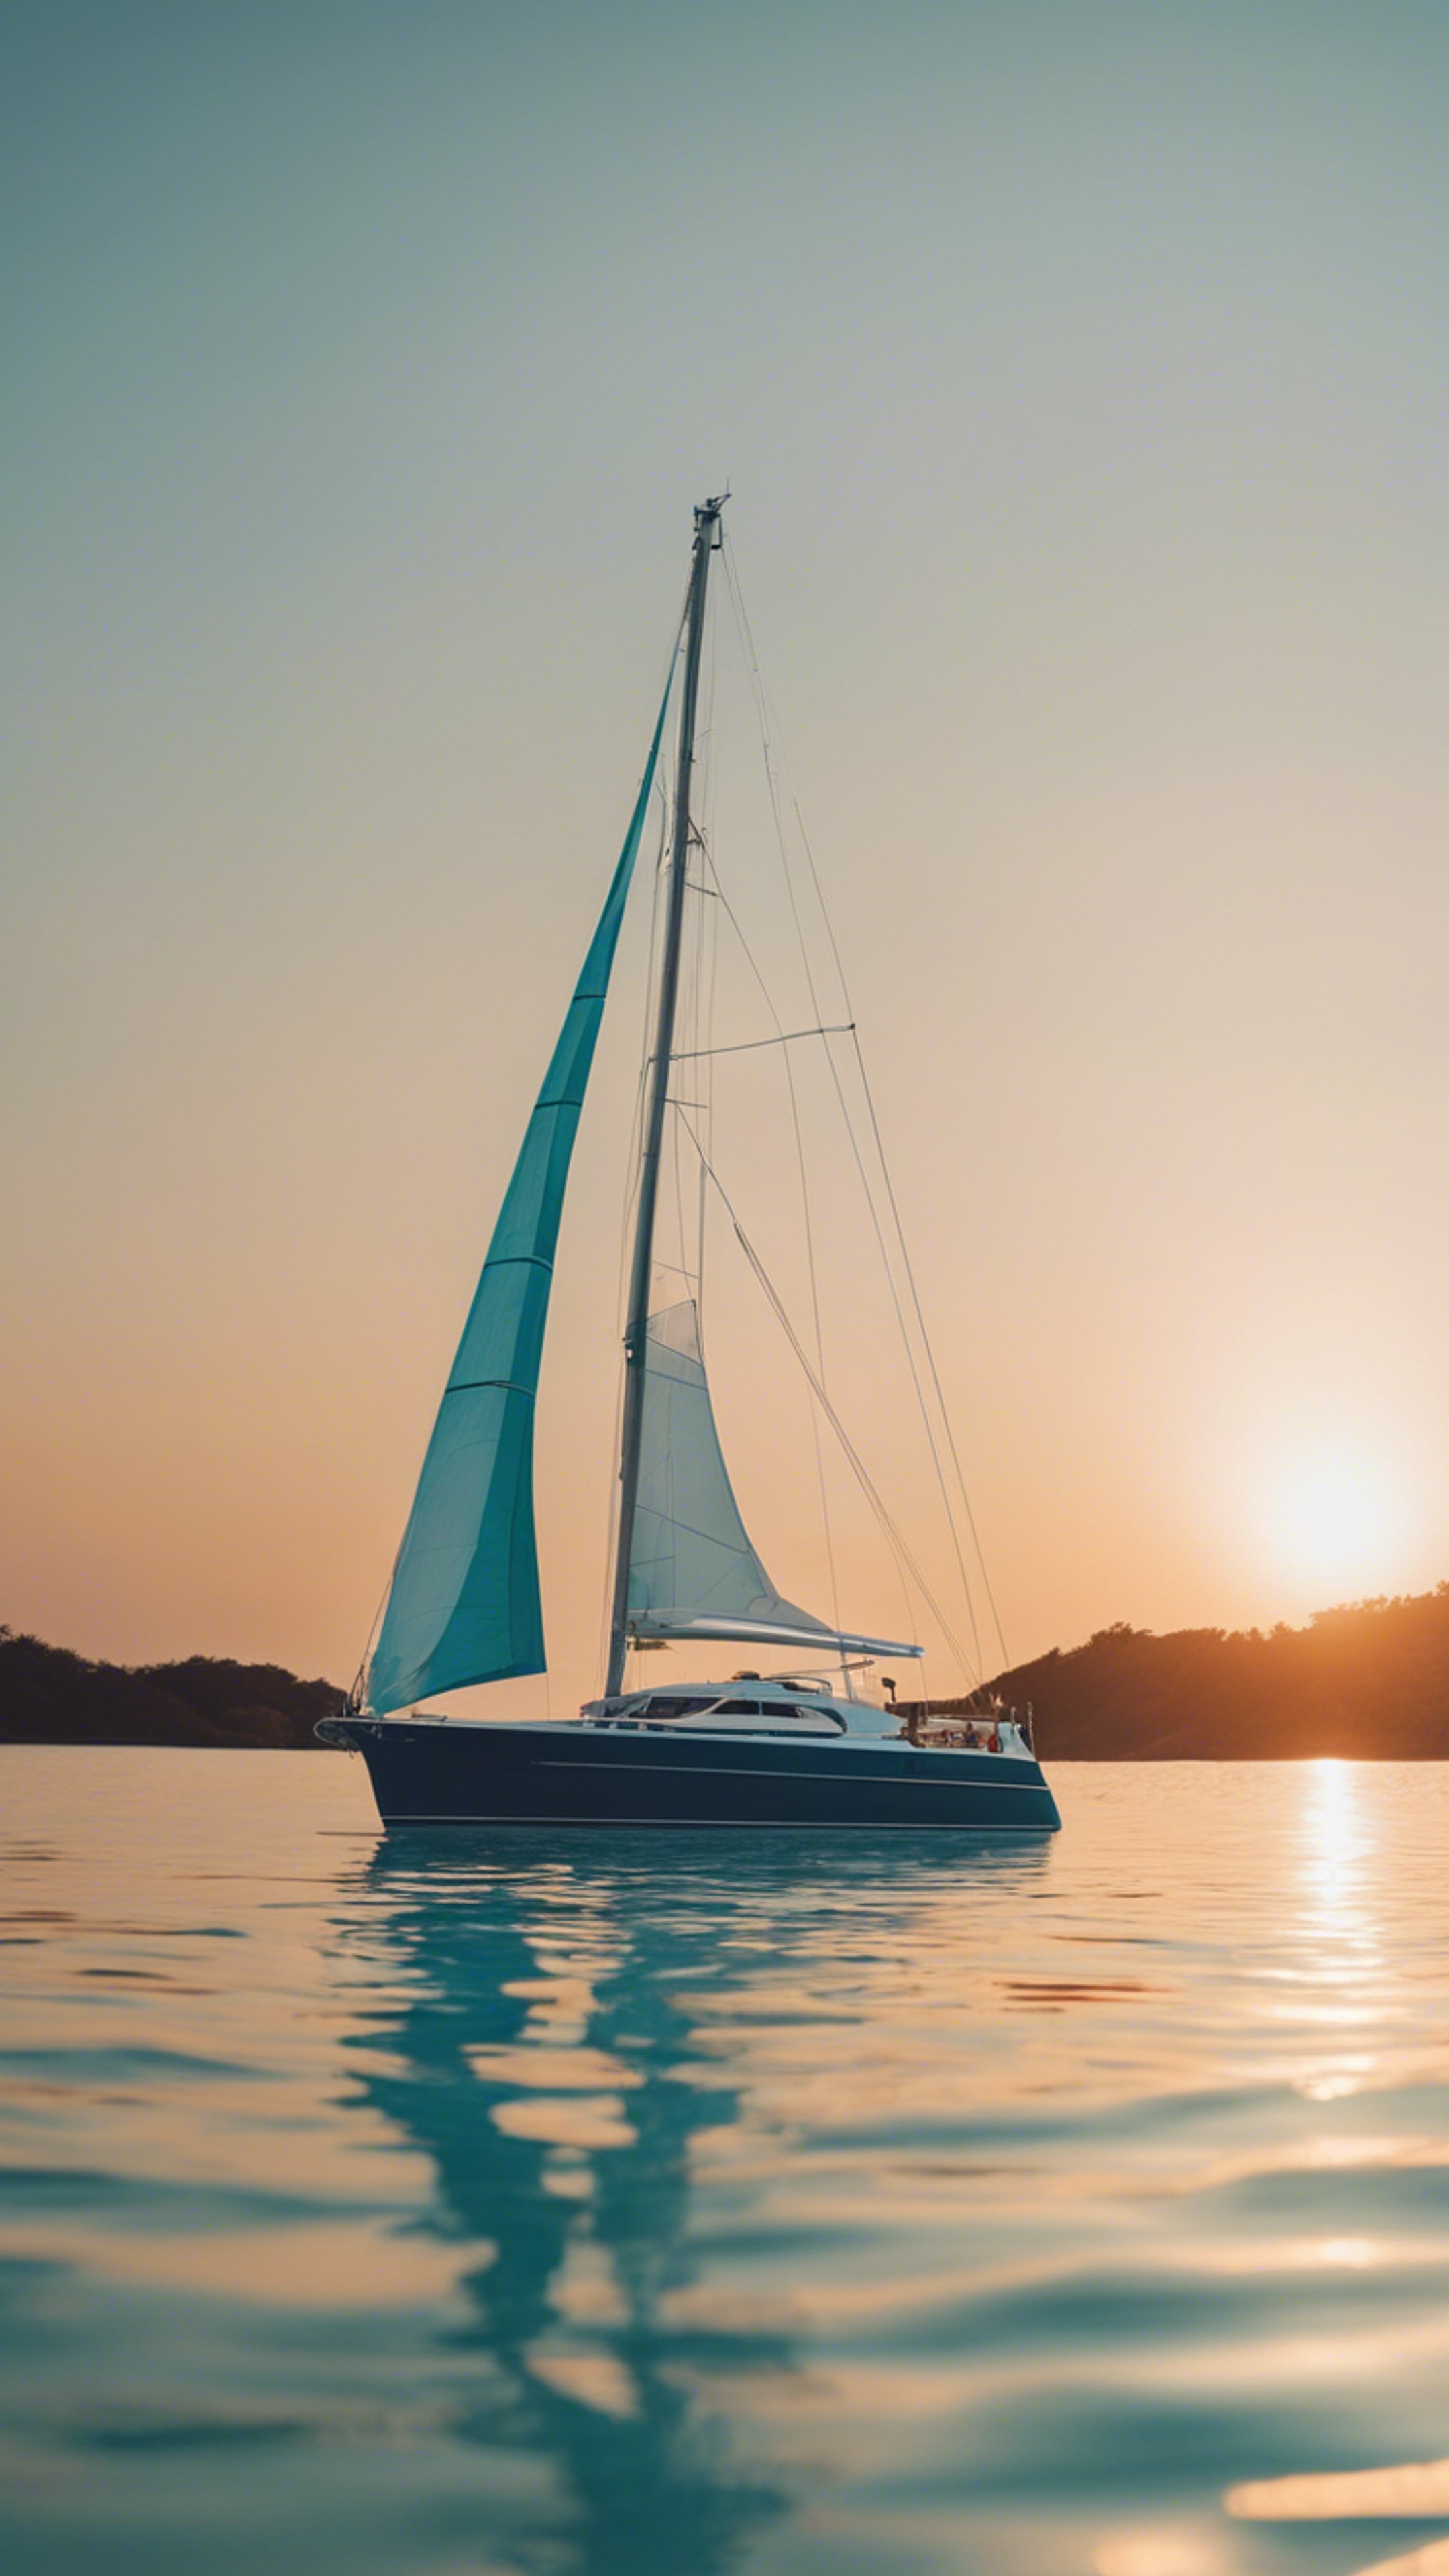 A preppy blue yacht sailing calmly on clear aquamarine waters at sunset. Tapet[1bfcce9f38c64176b950]